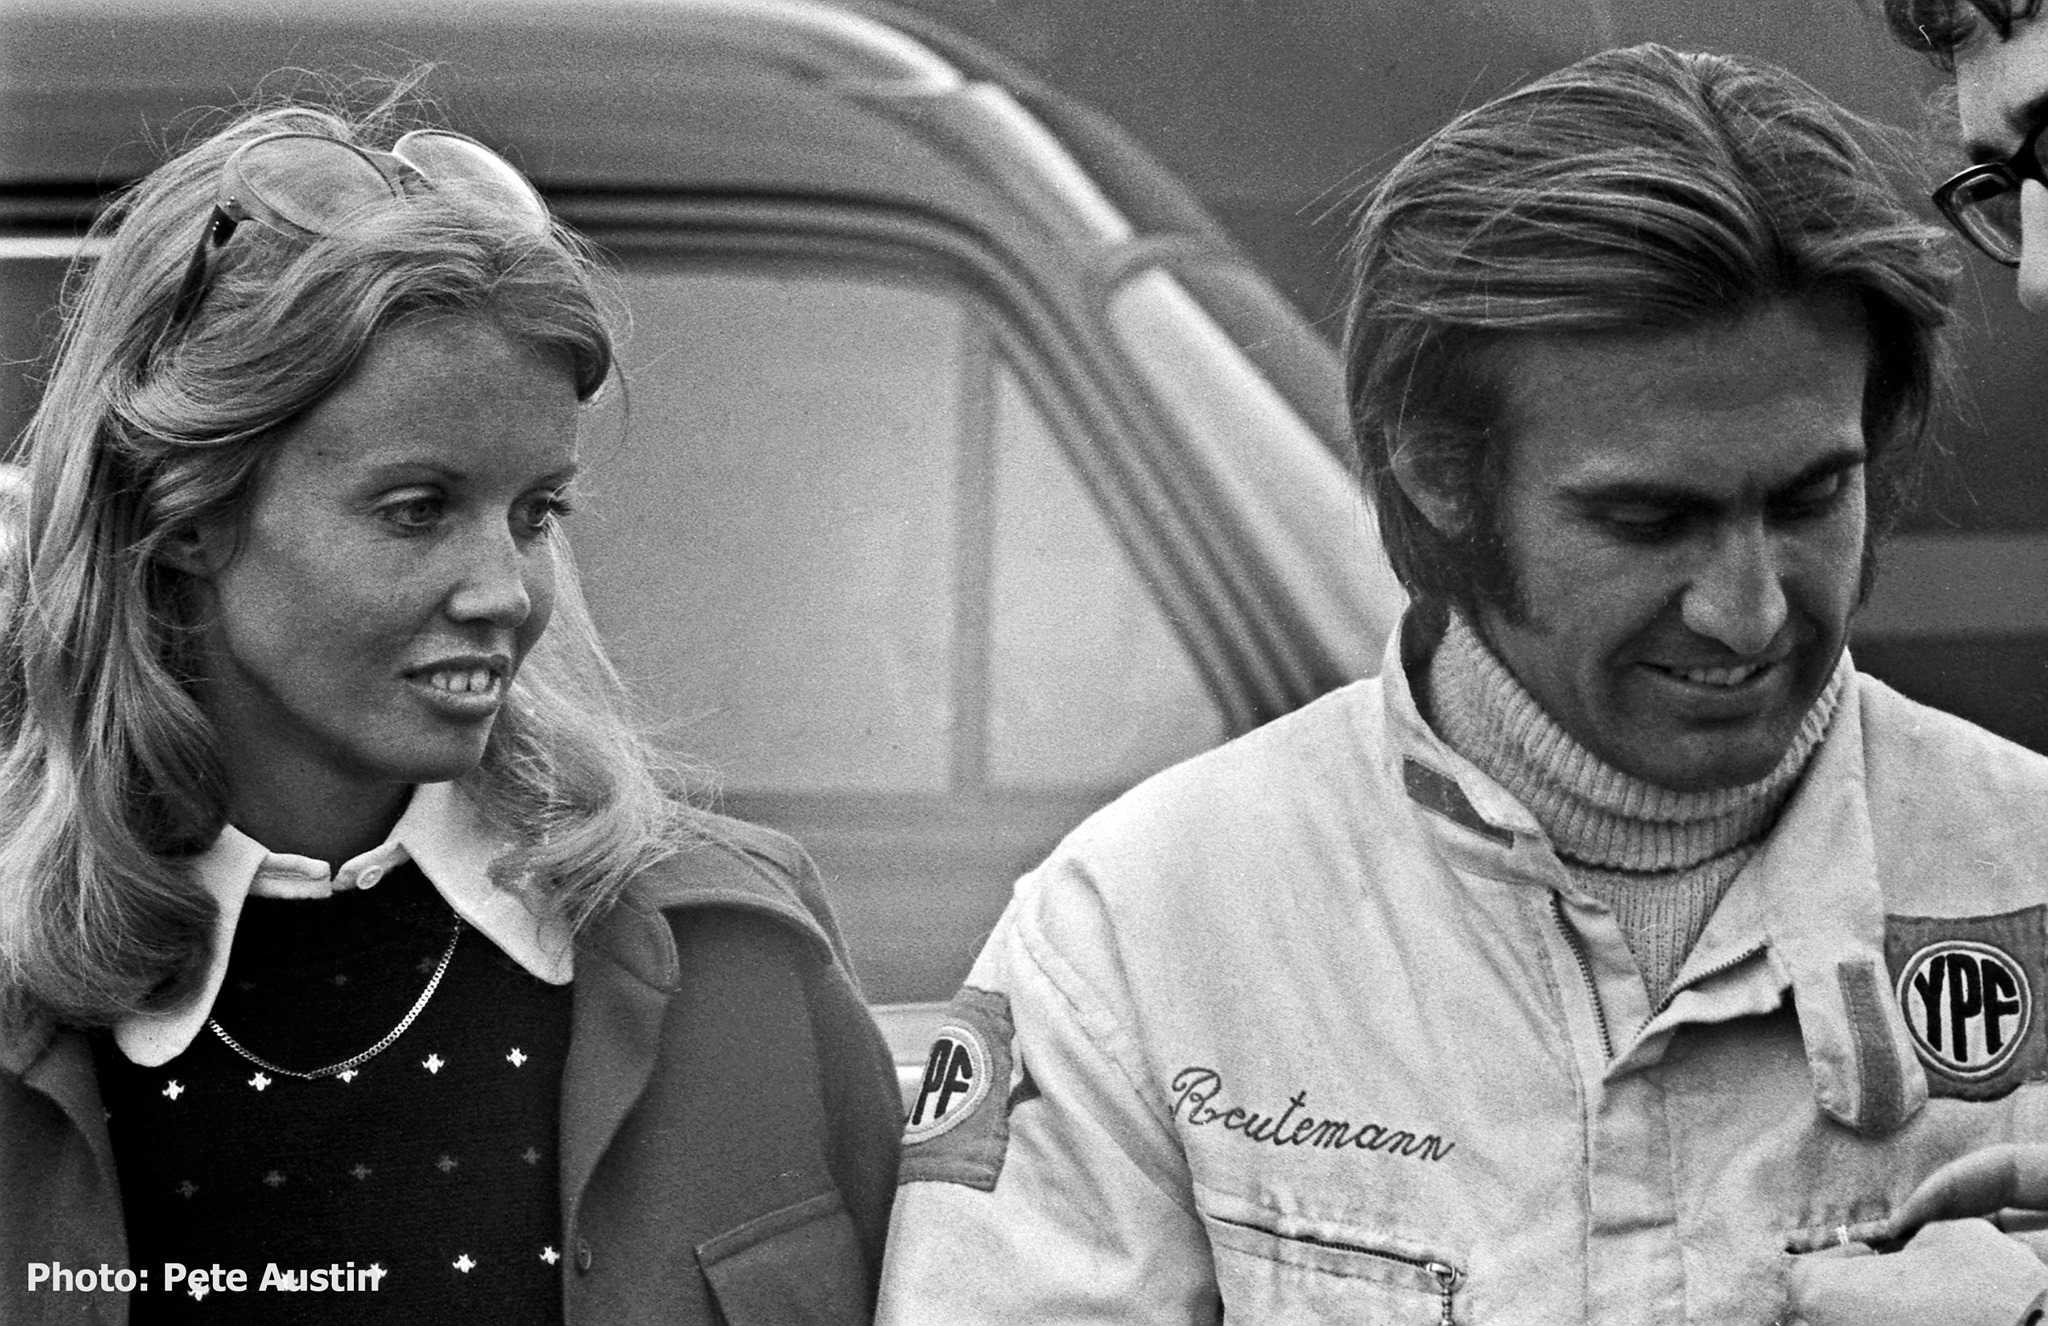 Carlos Reutemann with Barbro Peterson at Brands Hatch in 1974. 